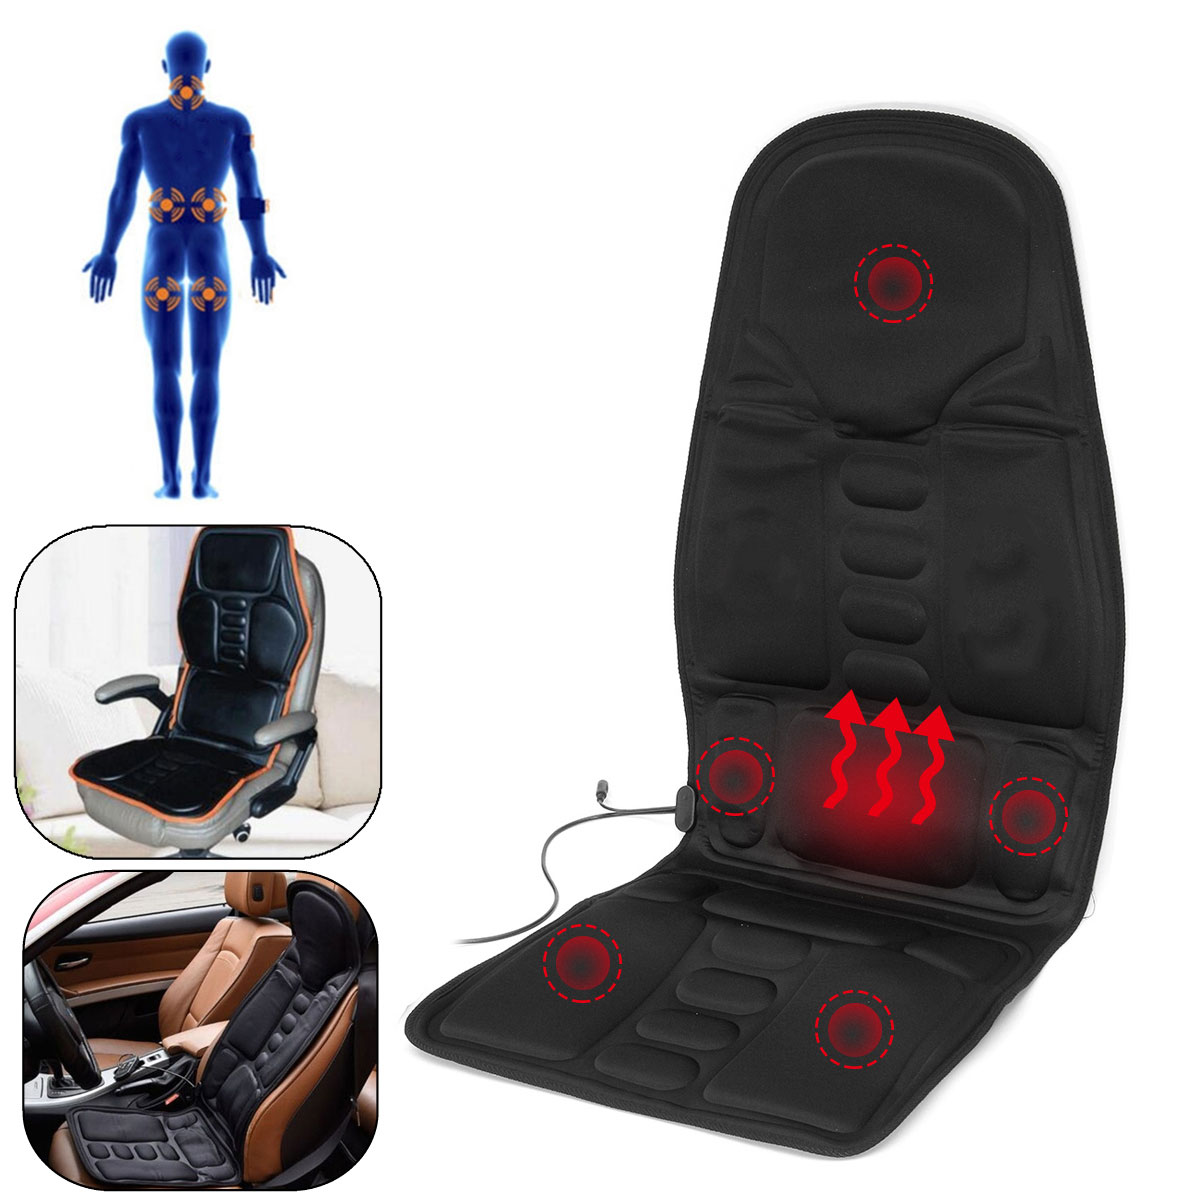 KIFIT Practical Multifunctional Car Chair Body Massage Heat Mat Seat Cover Cushion Neck Pain Lumbar Support Pad Back Massager